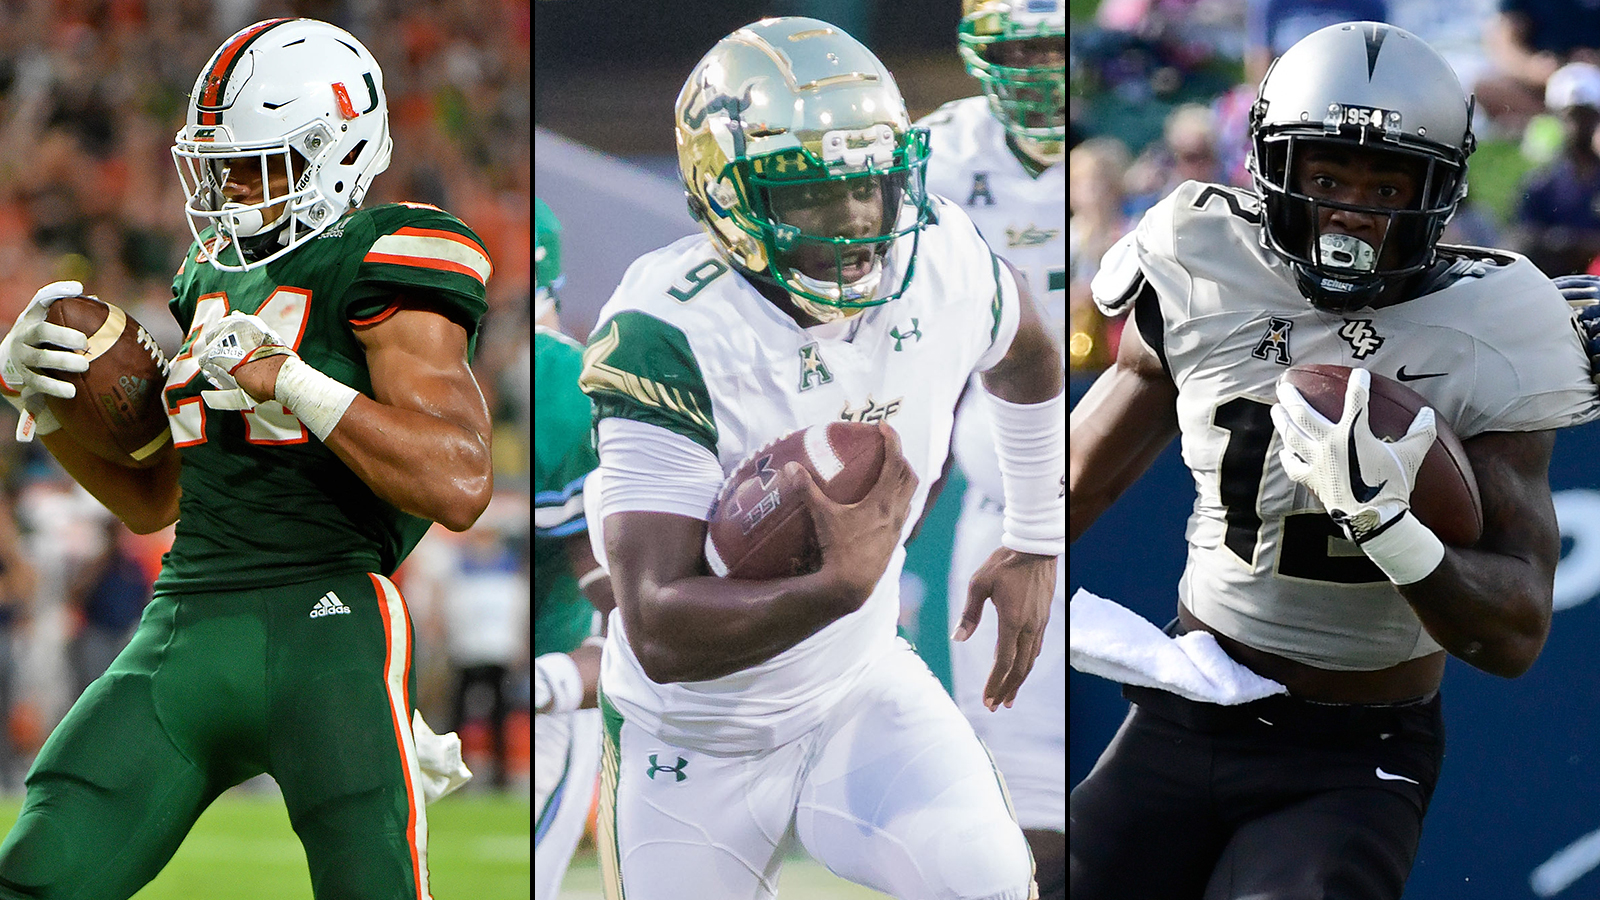 Miami stands pat at 8, UCF inches closer to USF in latest AP poll